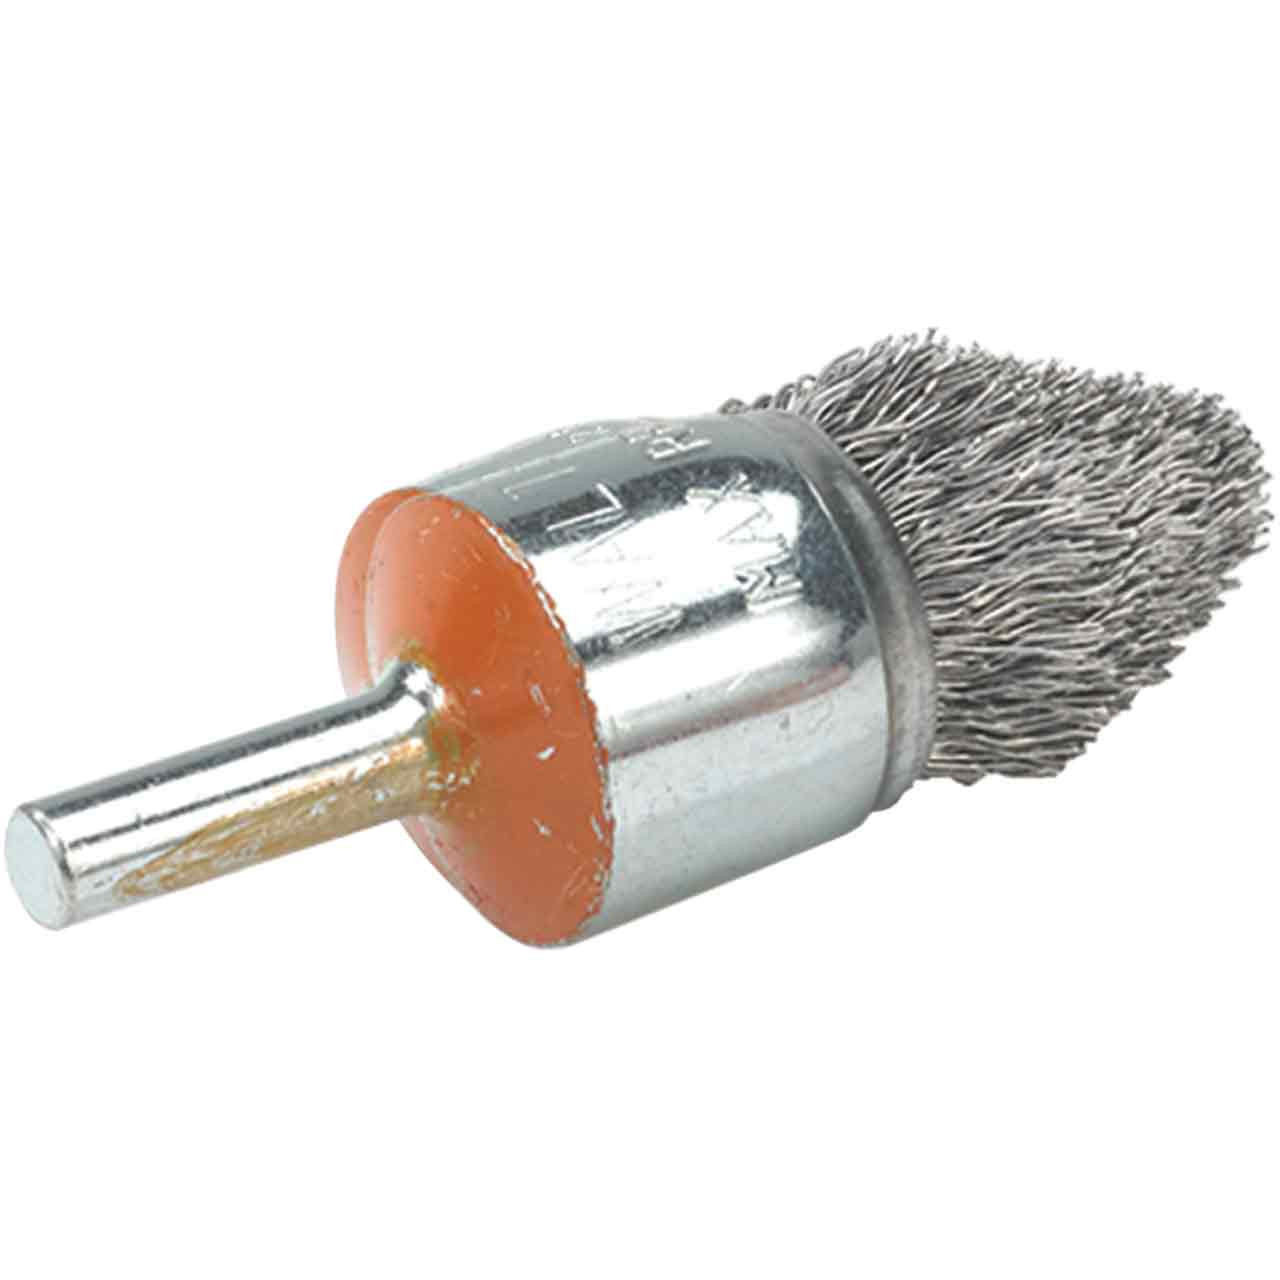 https://cdn11.bigcommerce.com/s-u3hf7jh4/images/stencil/1280x1280/products/734028/1103818/walter-13c028-mounted-wire-brush-.014-conical-with-crimped-wire-for-steel__31640.1697047145.jpg?c=2